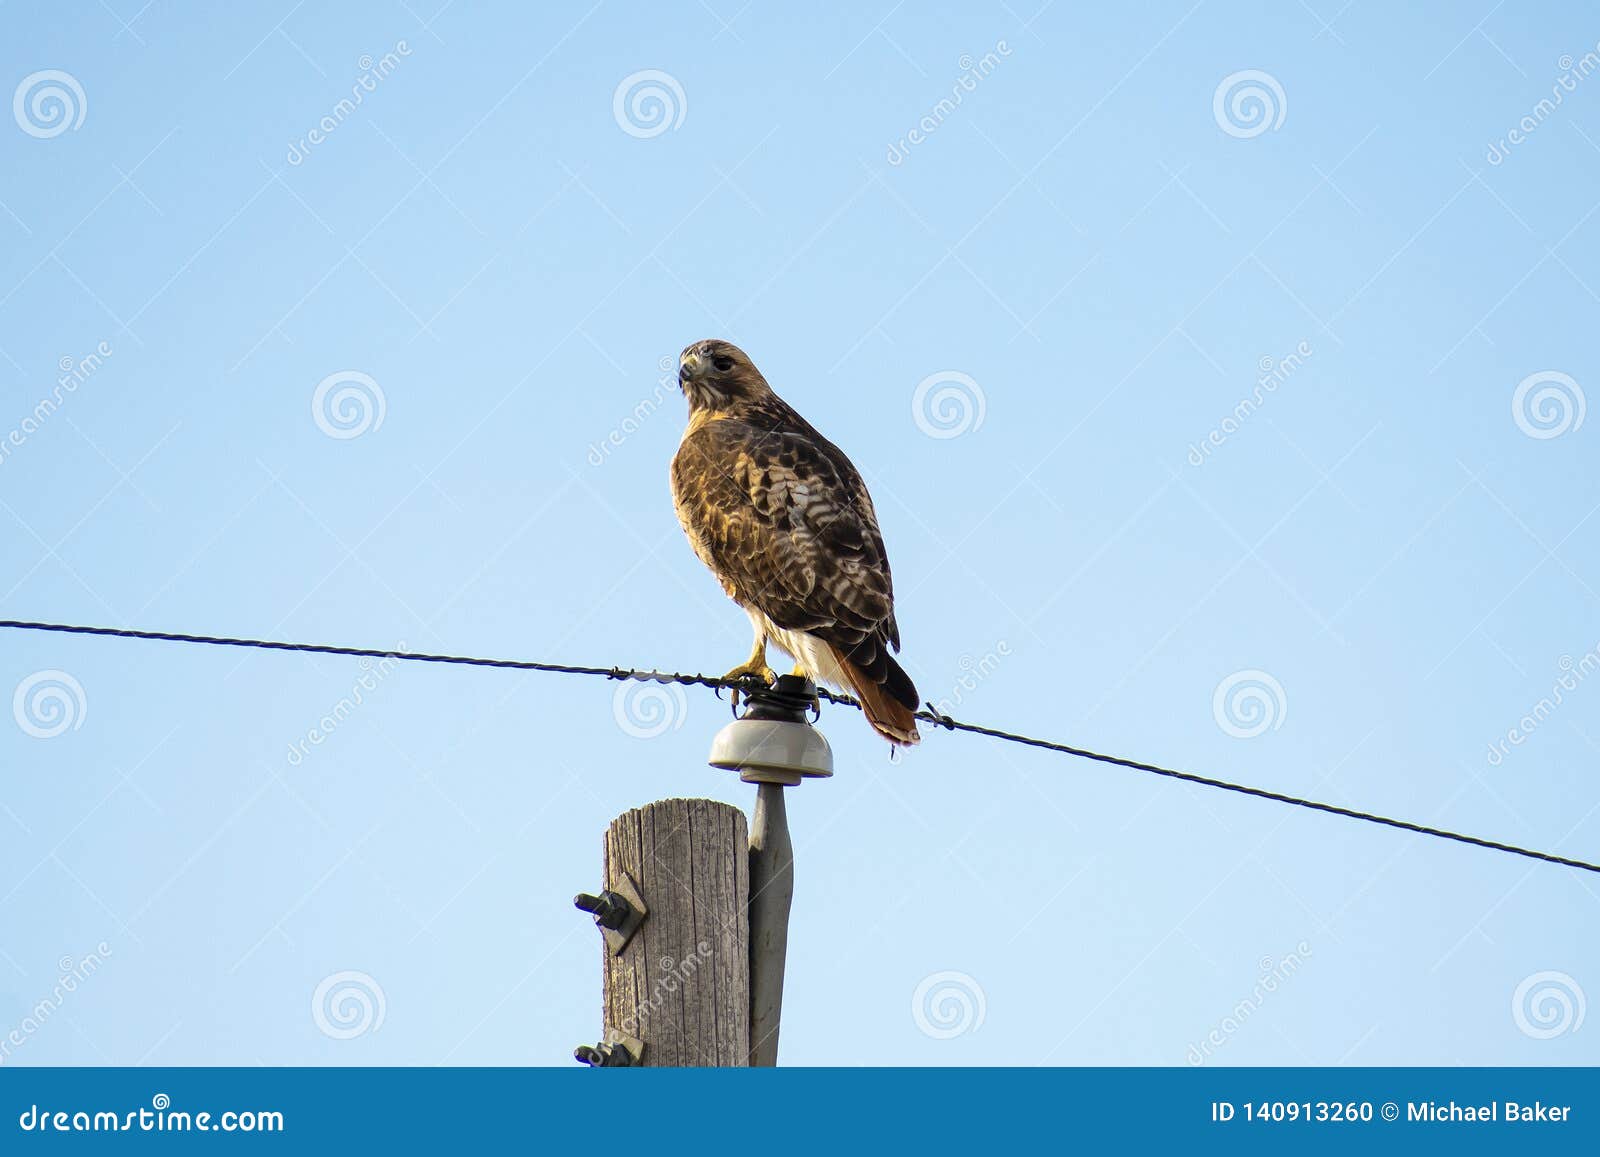 Red Tailed Hawk Resting Atop a Utility Pole Stock Photo - Image of ...